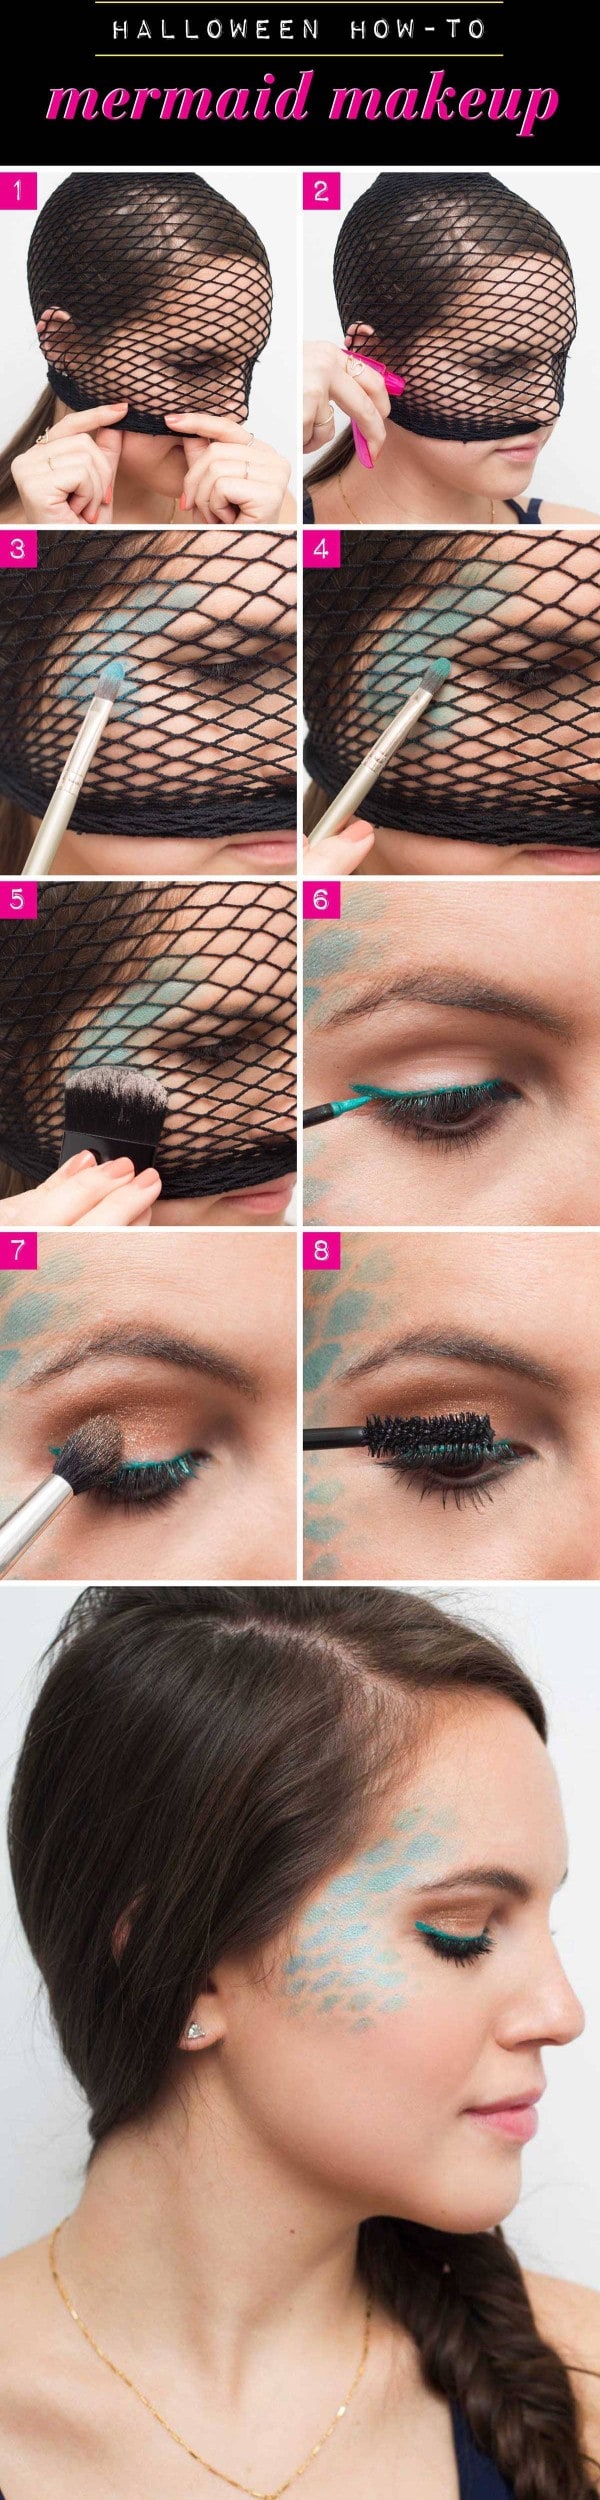 8 Super Easy Halloween Looks That You Can Create With Makeup That You Already Have